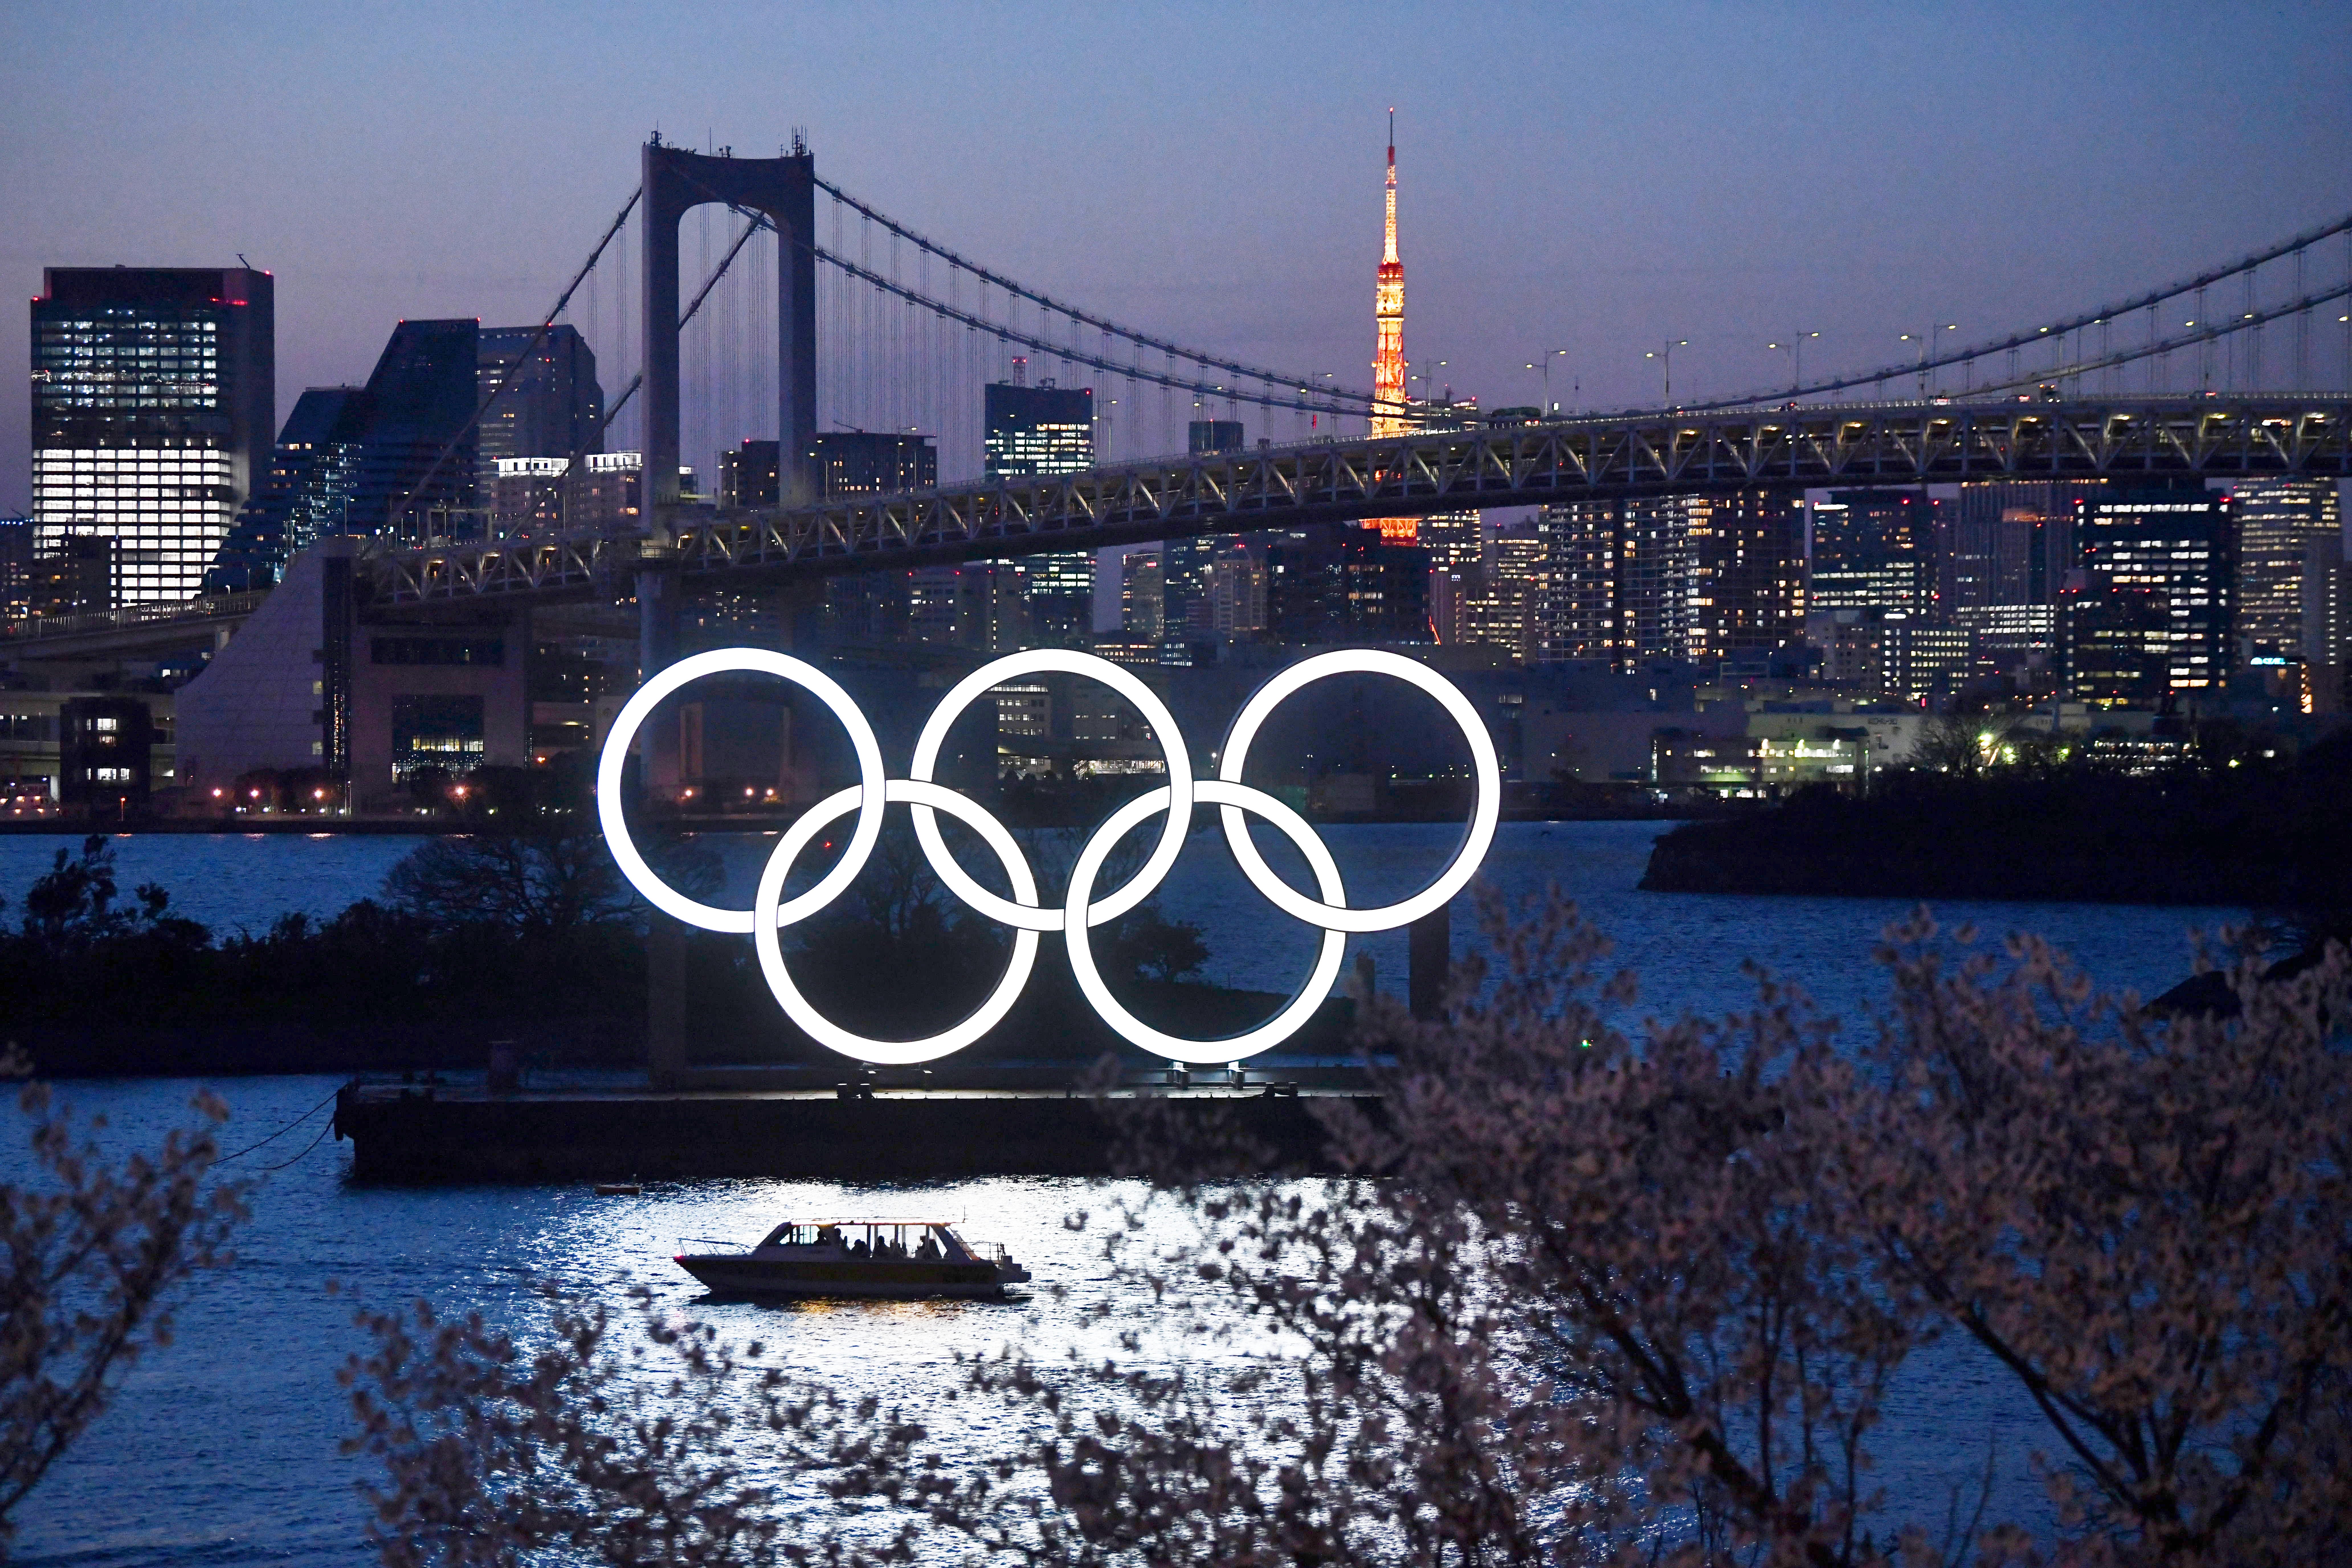 The Japanese government has said it will continue with plans to open the Olympics, meanwhile a majority of the Japanese want it to be cancelled or postponed